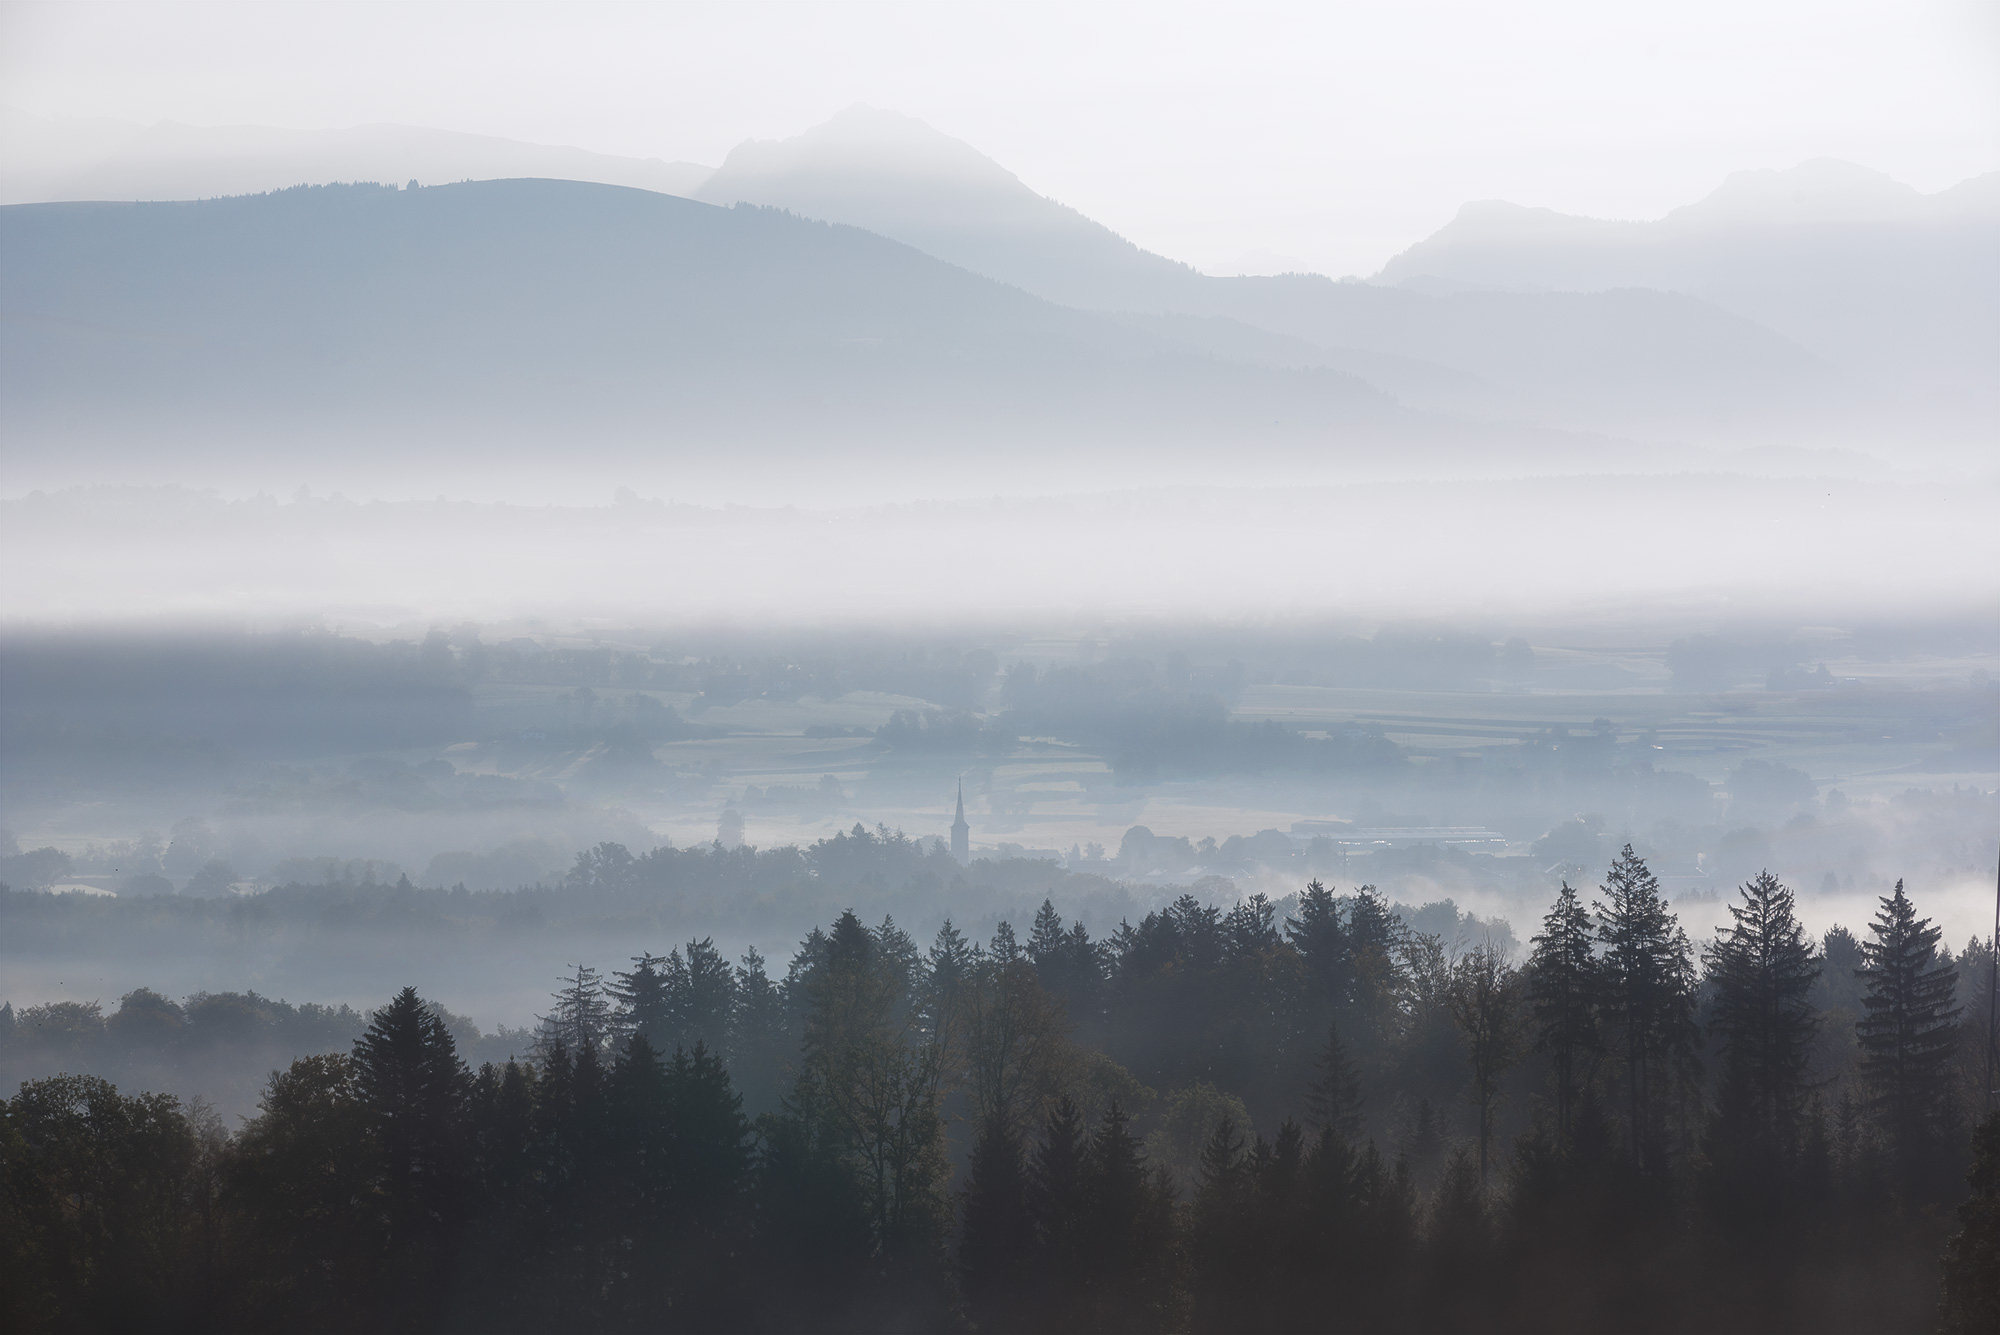 The Vaud countryside in the morning mist.